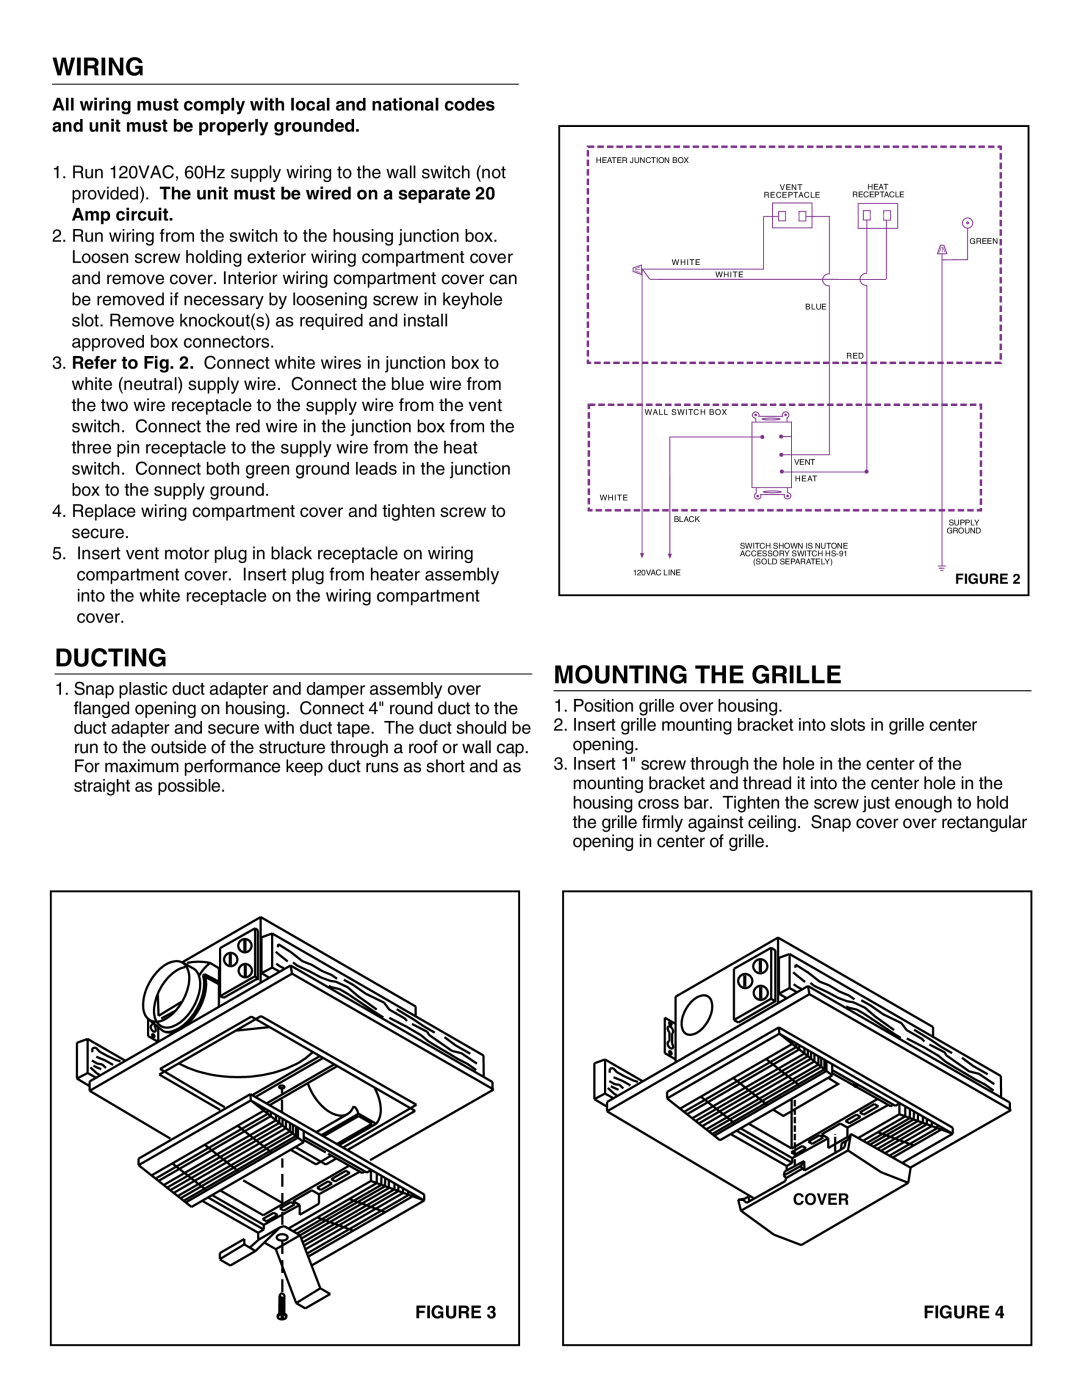 NuTone 605RP installation instructions Wiring, Ducting, Mounting The Grille, Amp circuit 